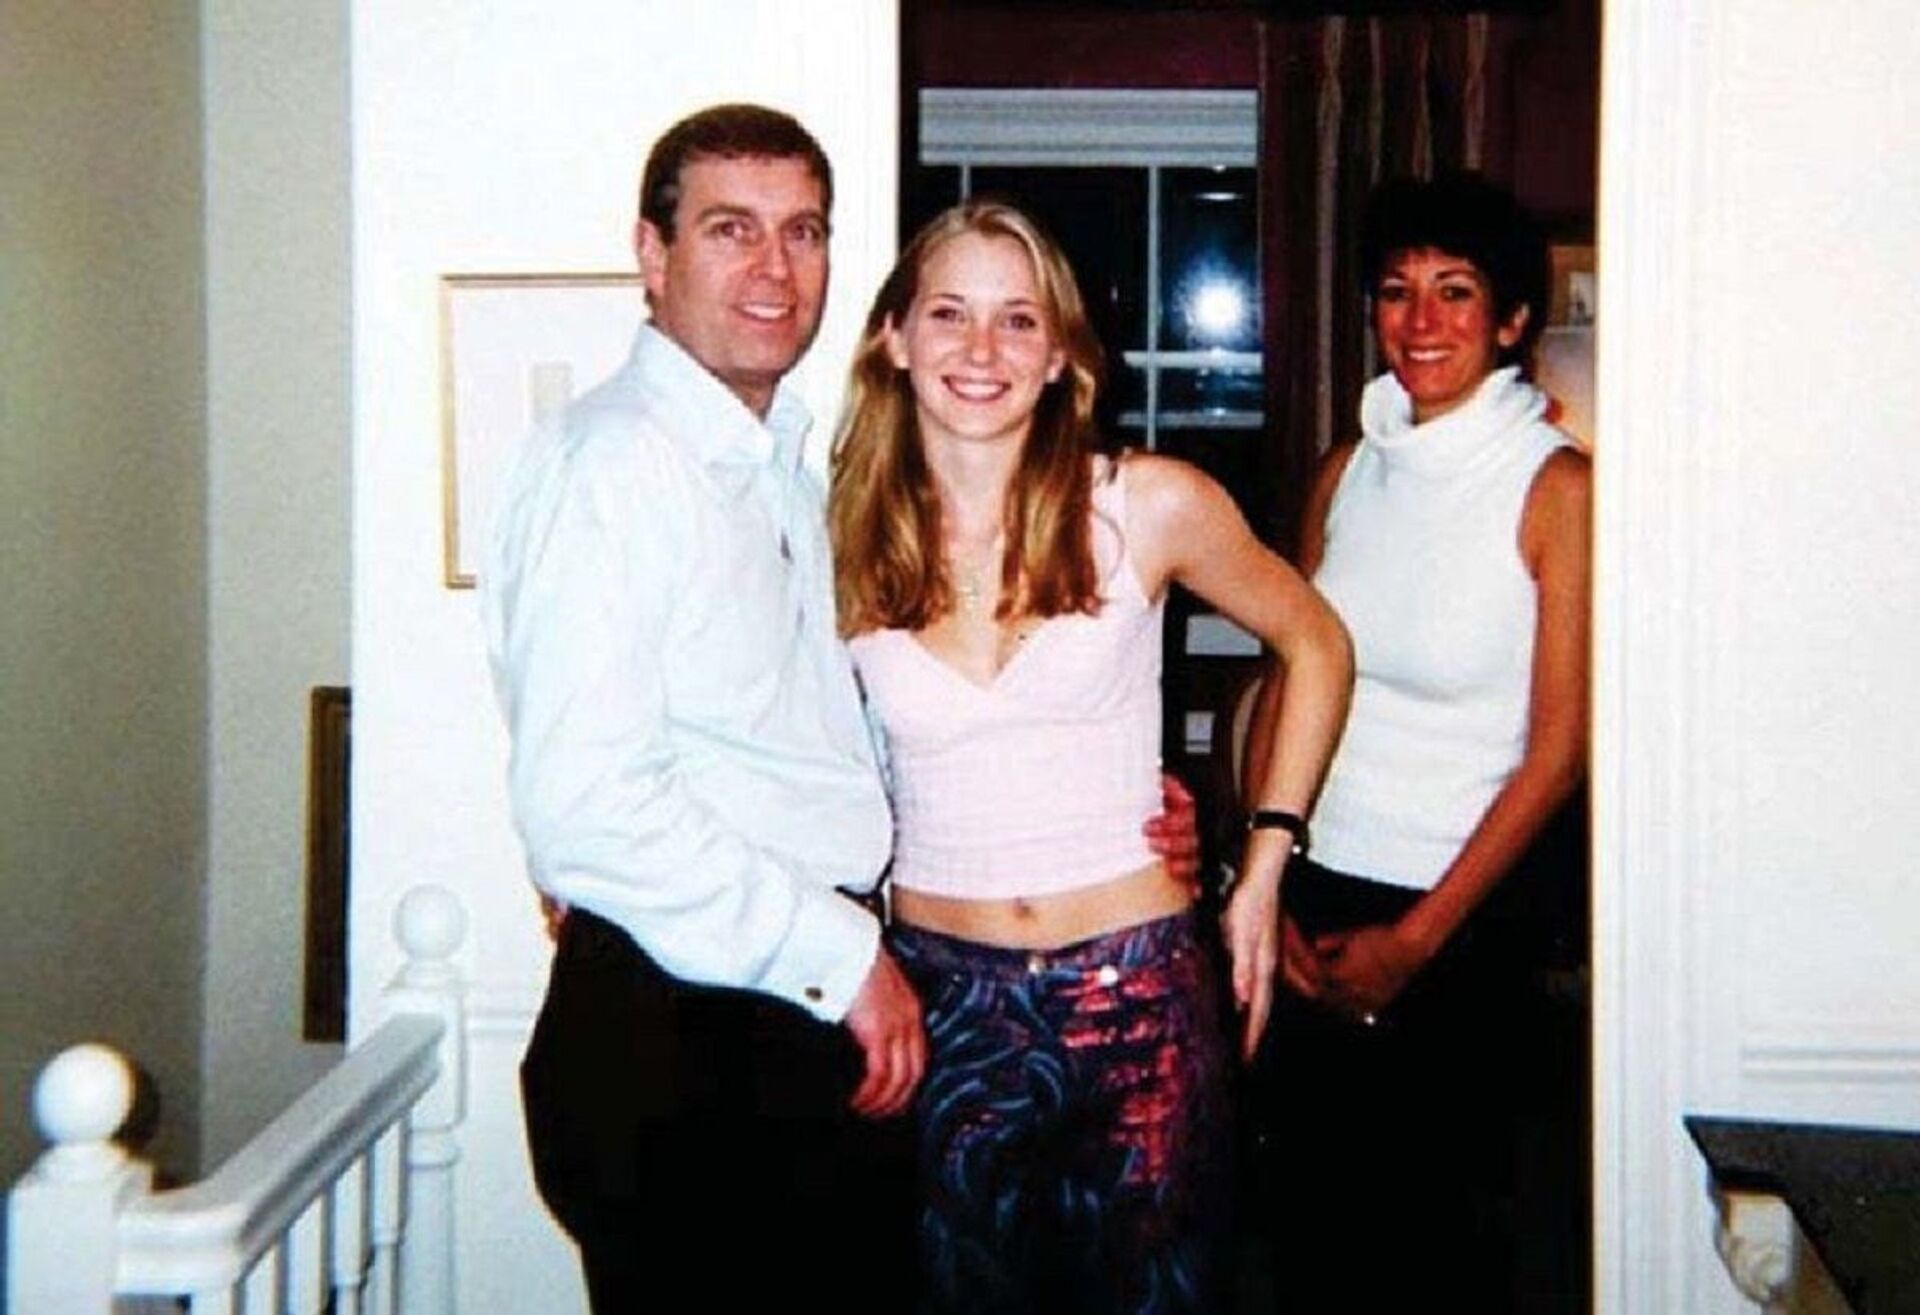 Prince Andrew’s Epstein Ties Allegedly Used as ‘Distraction’ to Keep Bill Clinton 'Out of the Frame’ - Sputnik International, 1920, 16.06.2021